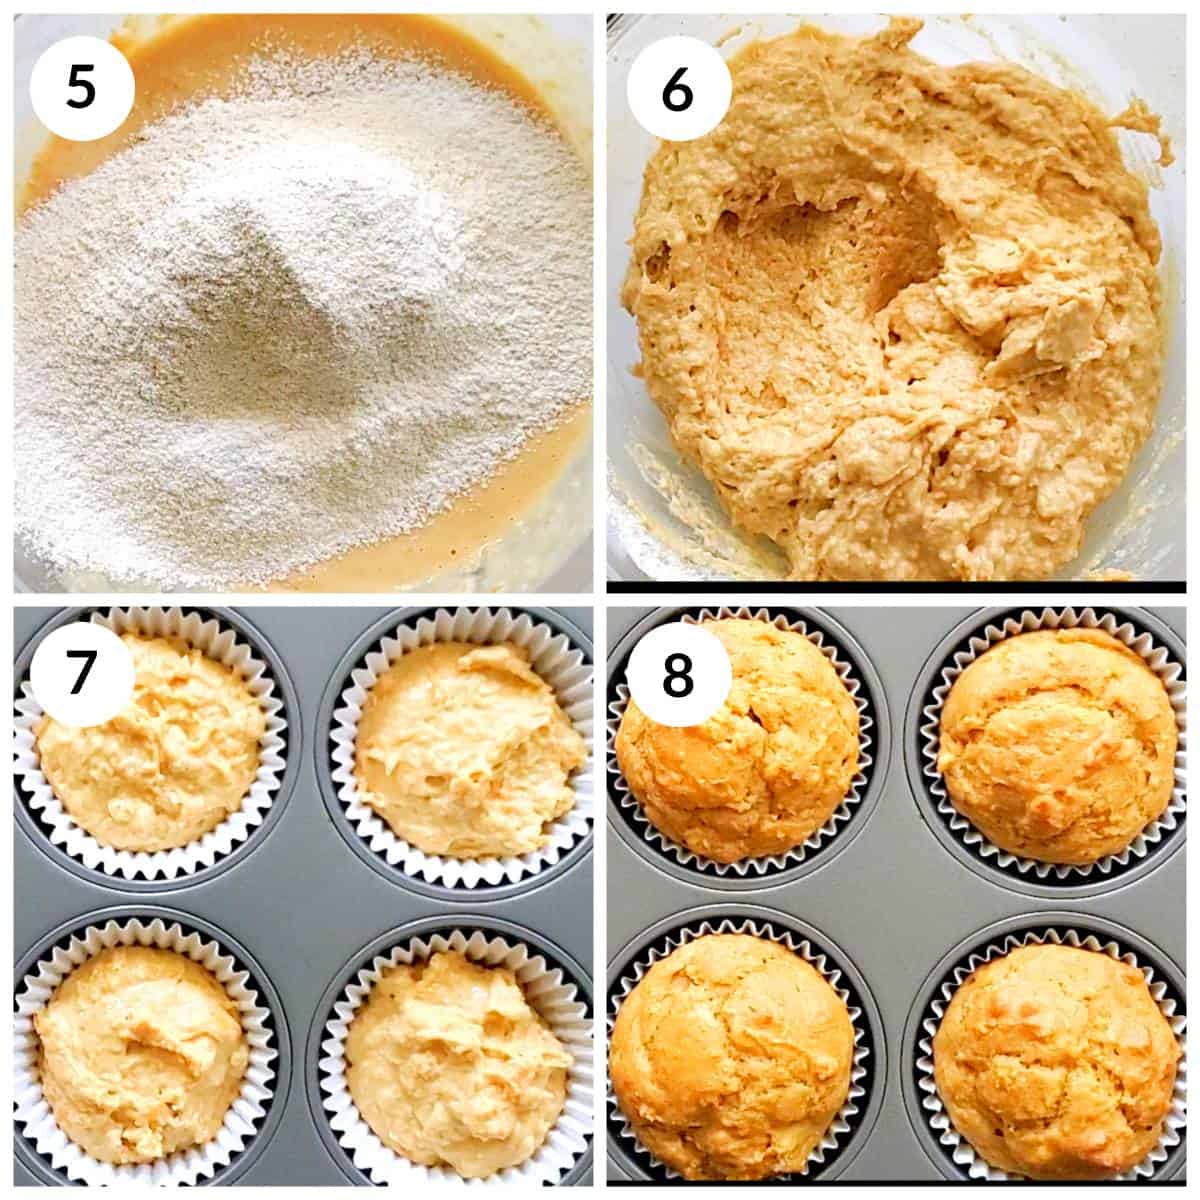 Steps to mix wet and dry ingredients for pupcakes and bake them